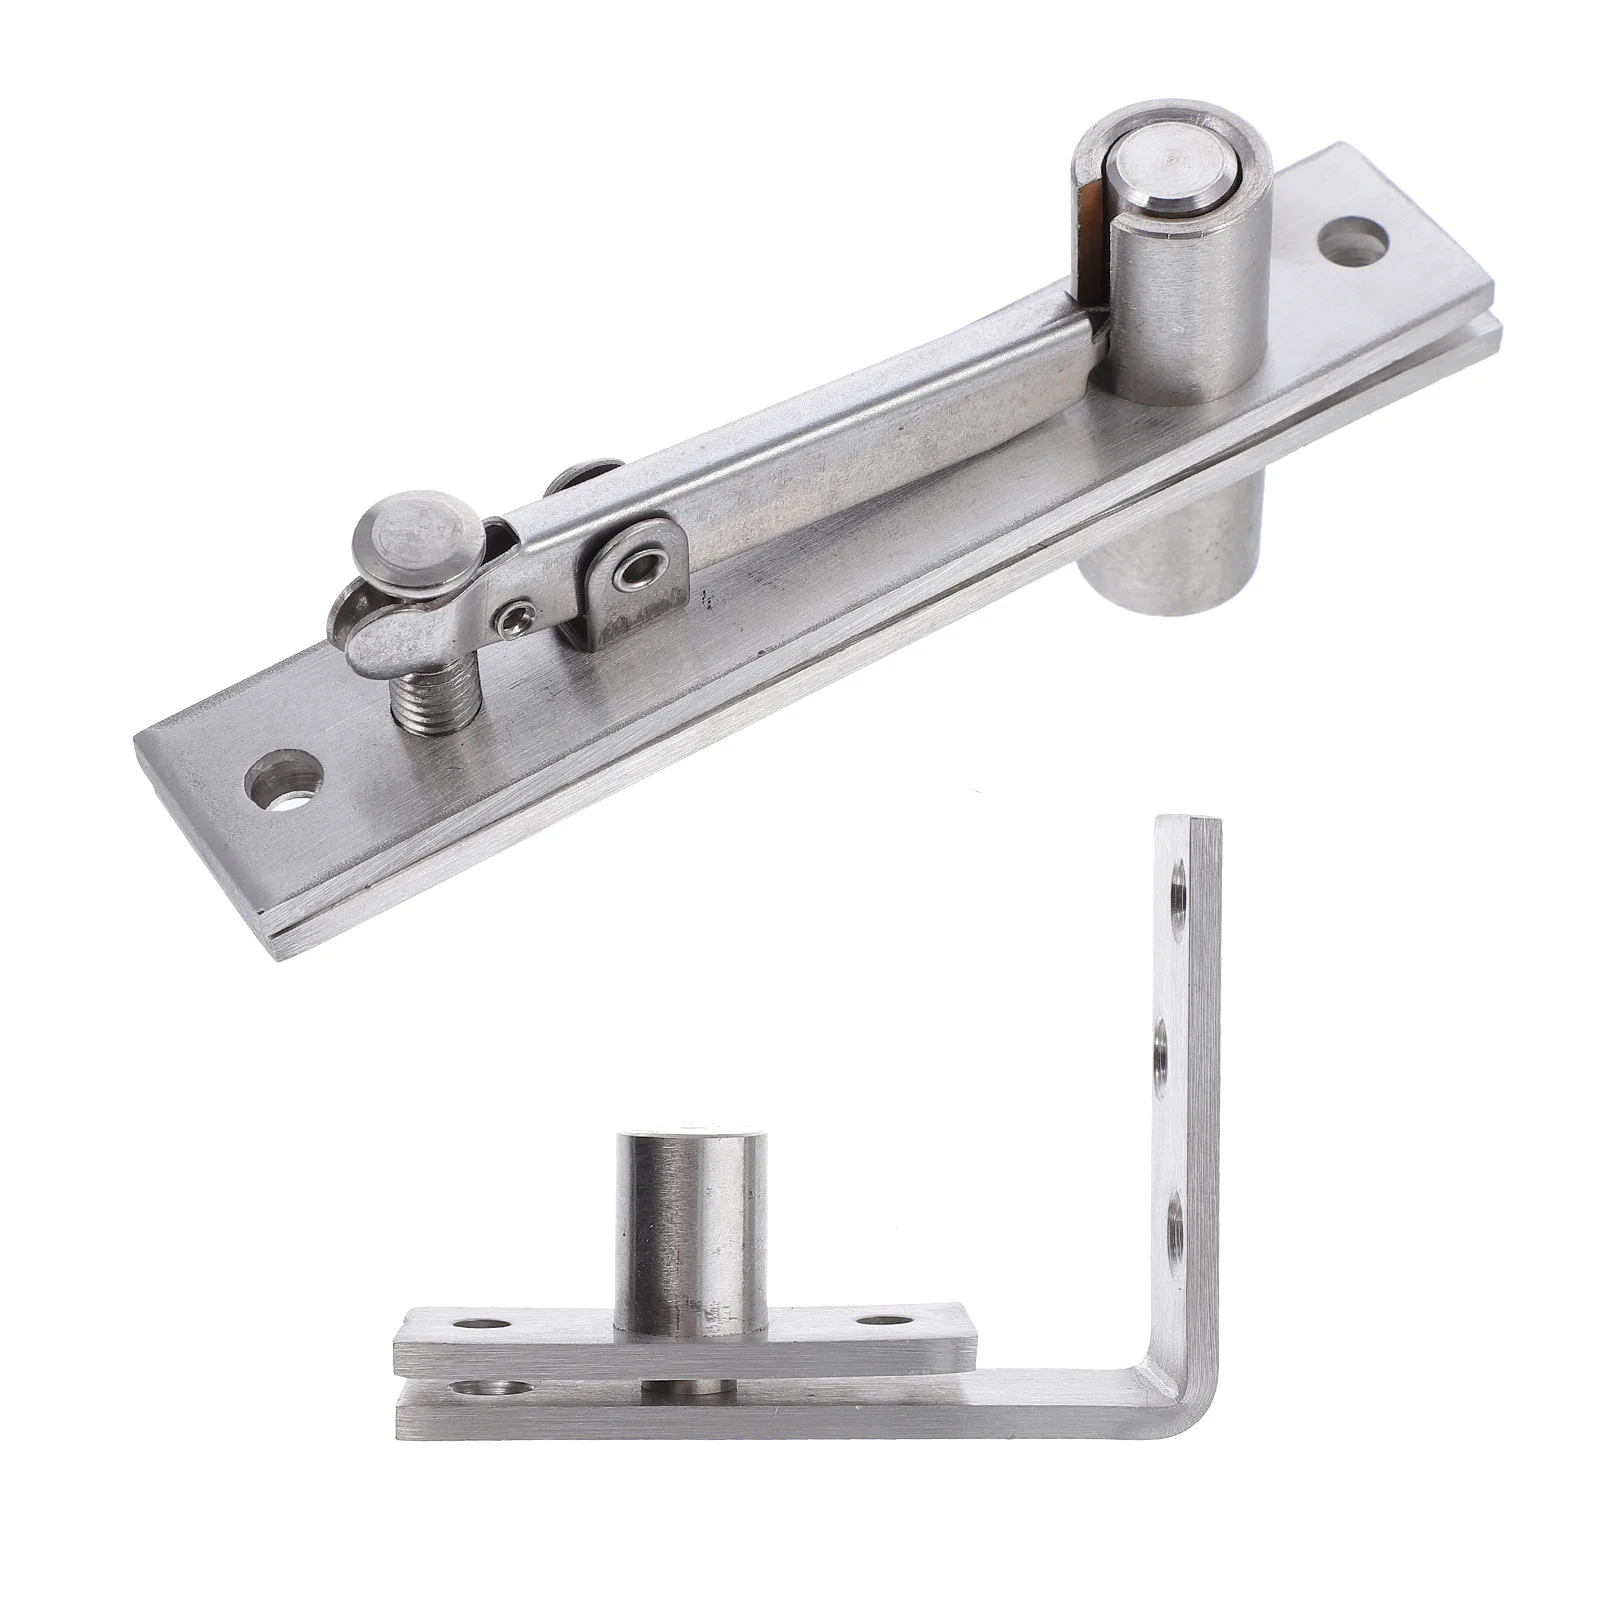 

Heaven and Earth Hinge Pivot Stainless Steel Cabinet Hinges Adjustable Revolving Rotation Door